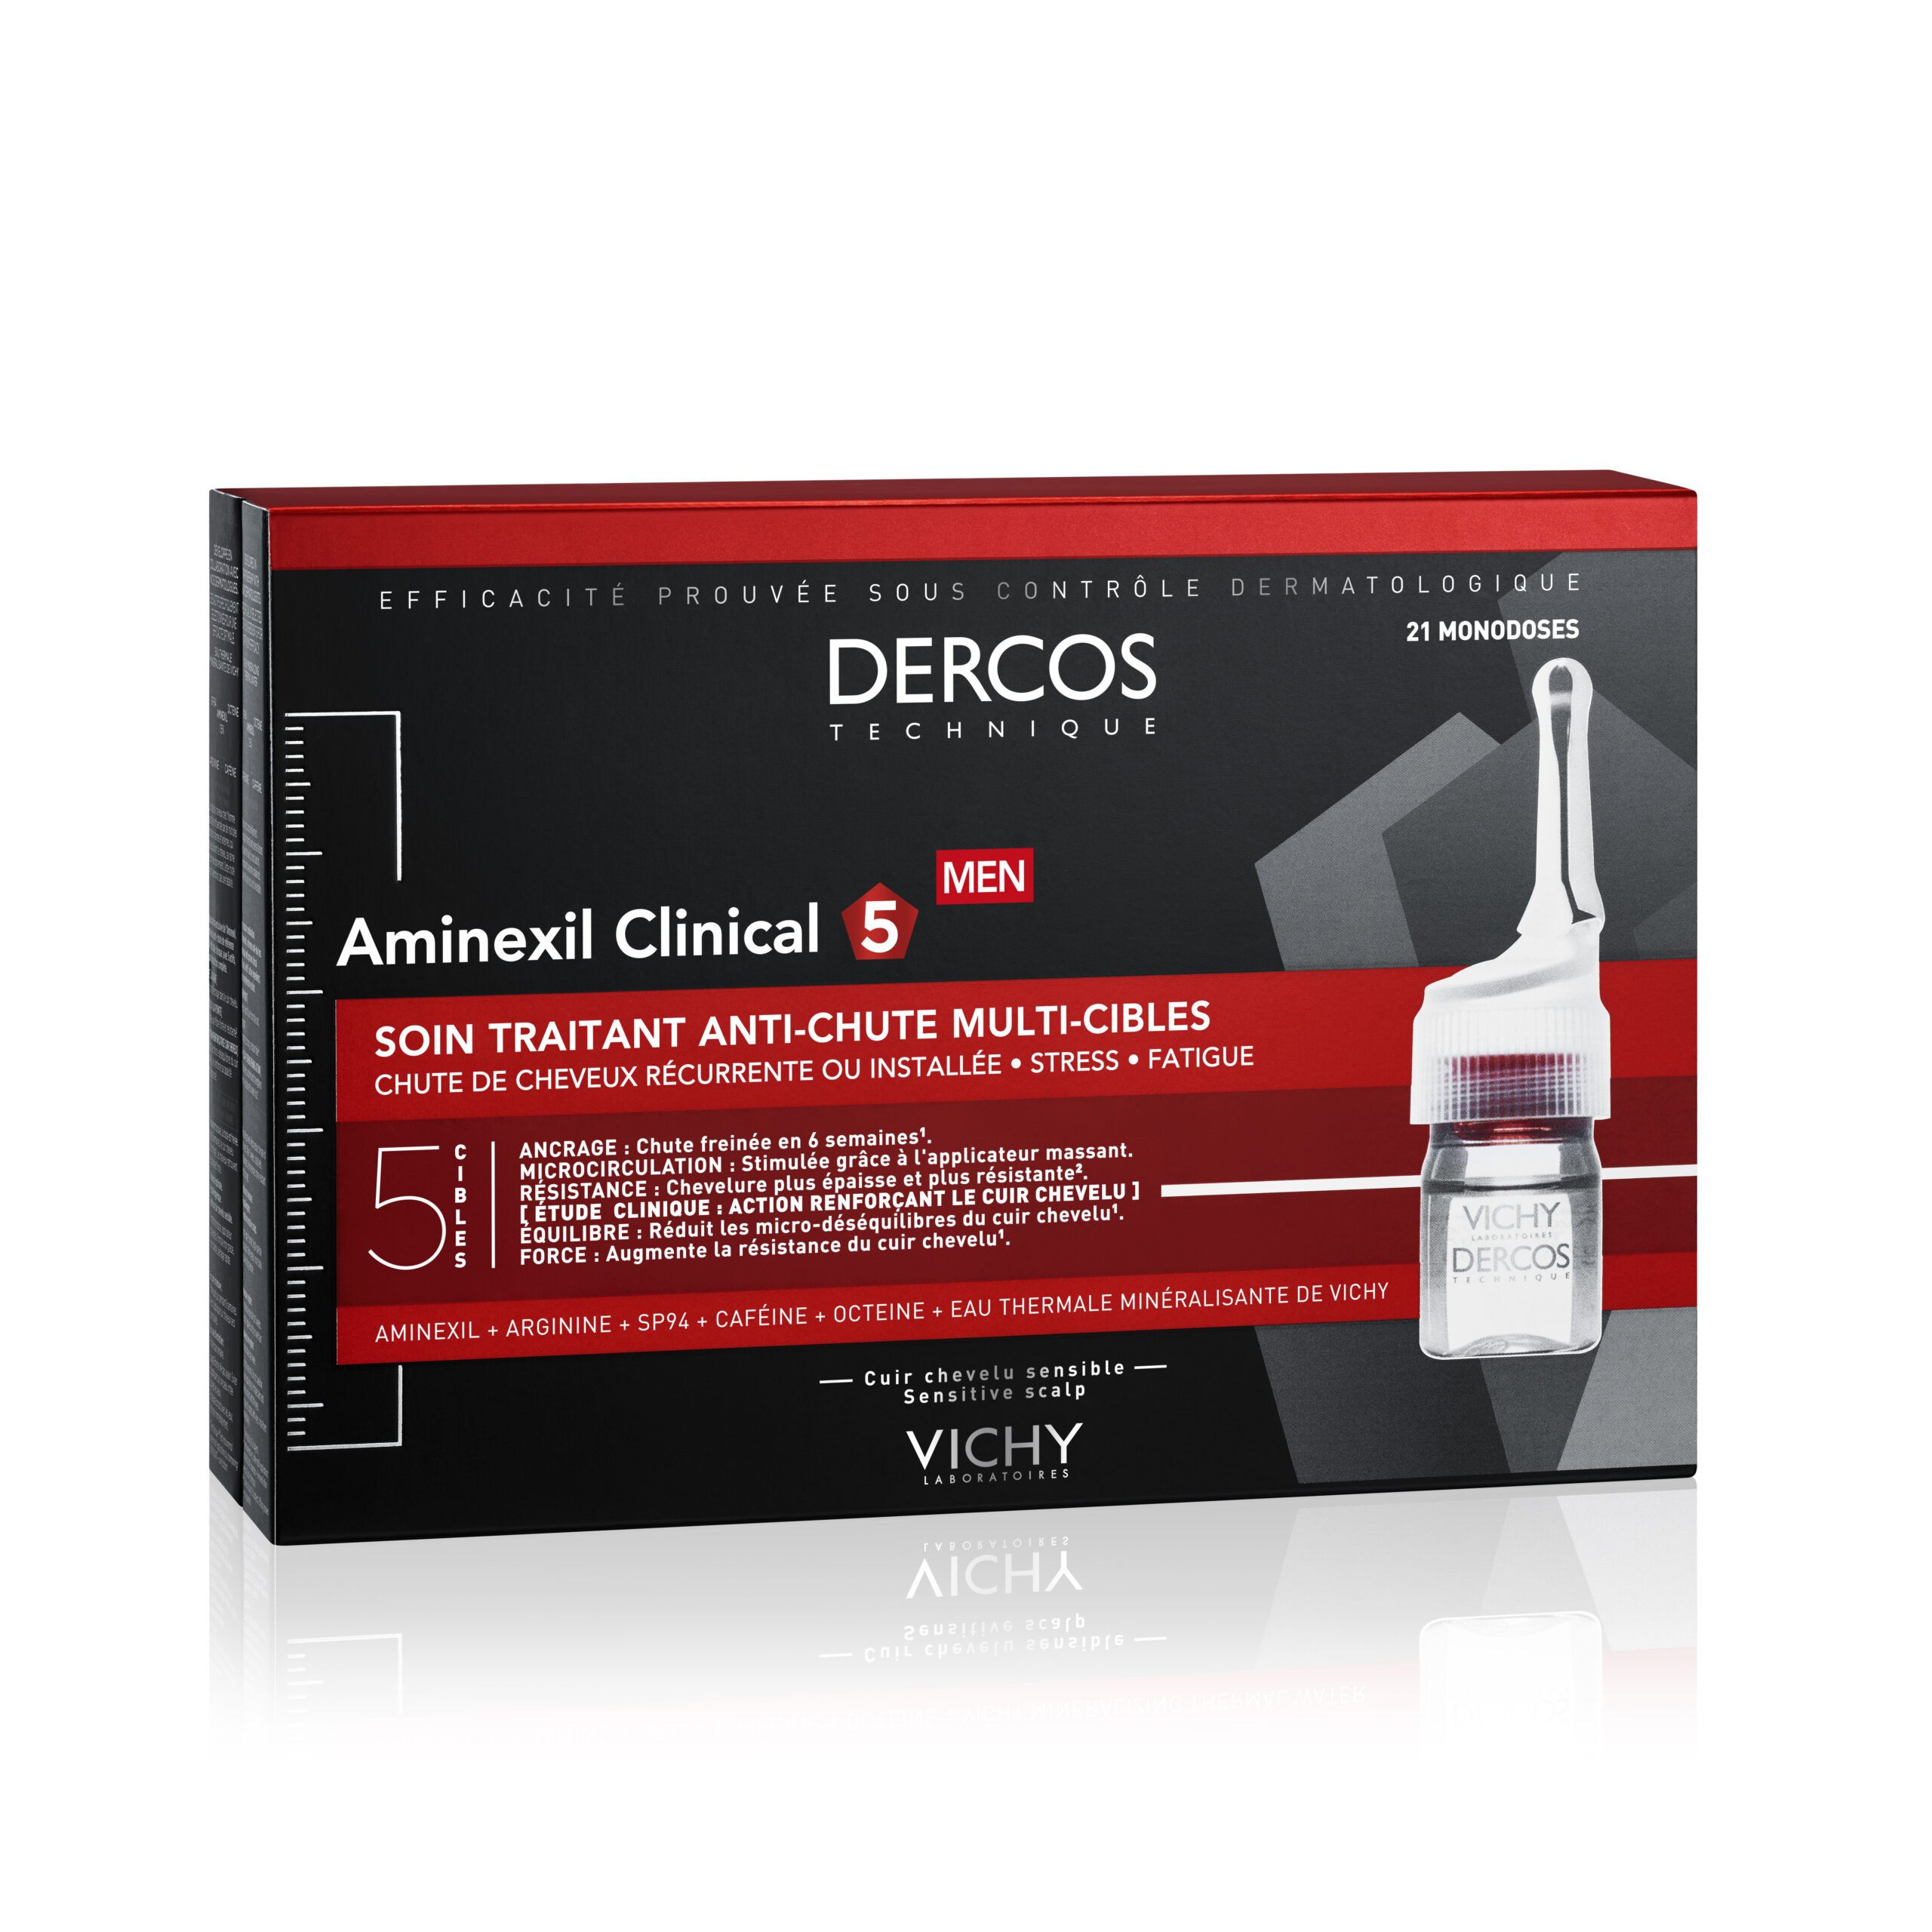 1MOMENT - Vichy Dercos Aminexil Clinical Cure Anti-Chute Hommes 21 Ampoules | 21 x 6ml